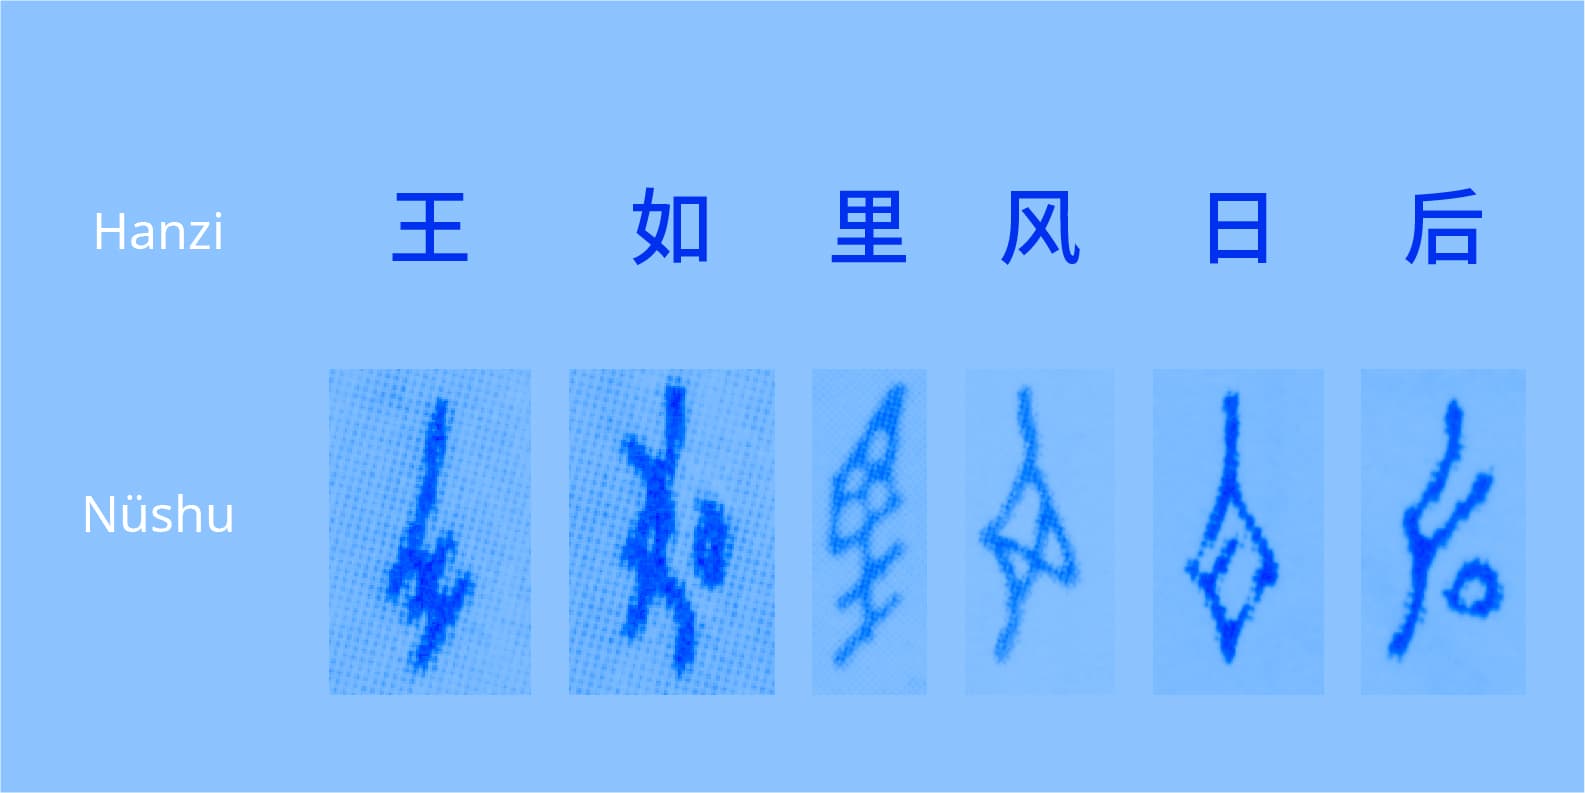 Selection of Chinese Hanzi ans Nüshu similar characters in blue shades